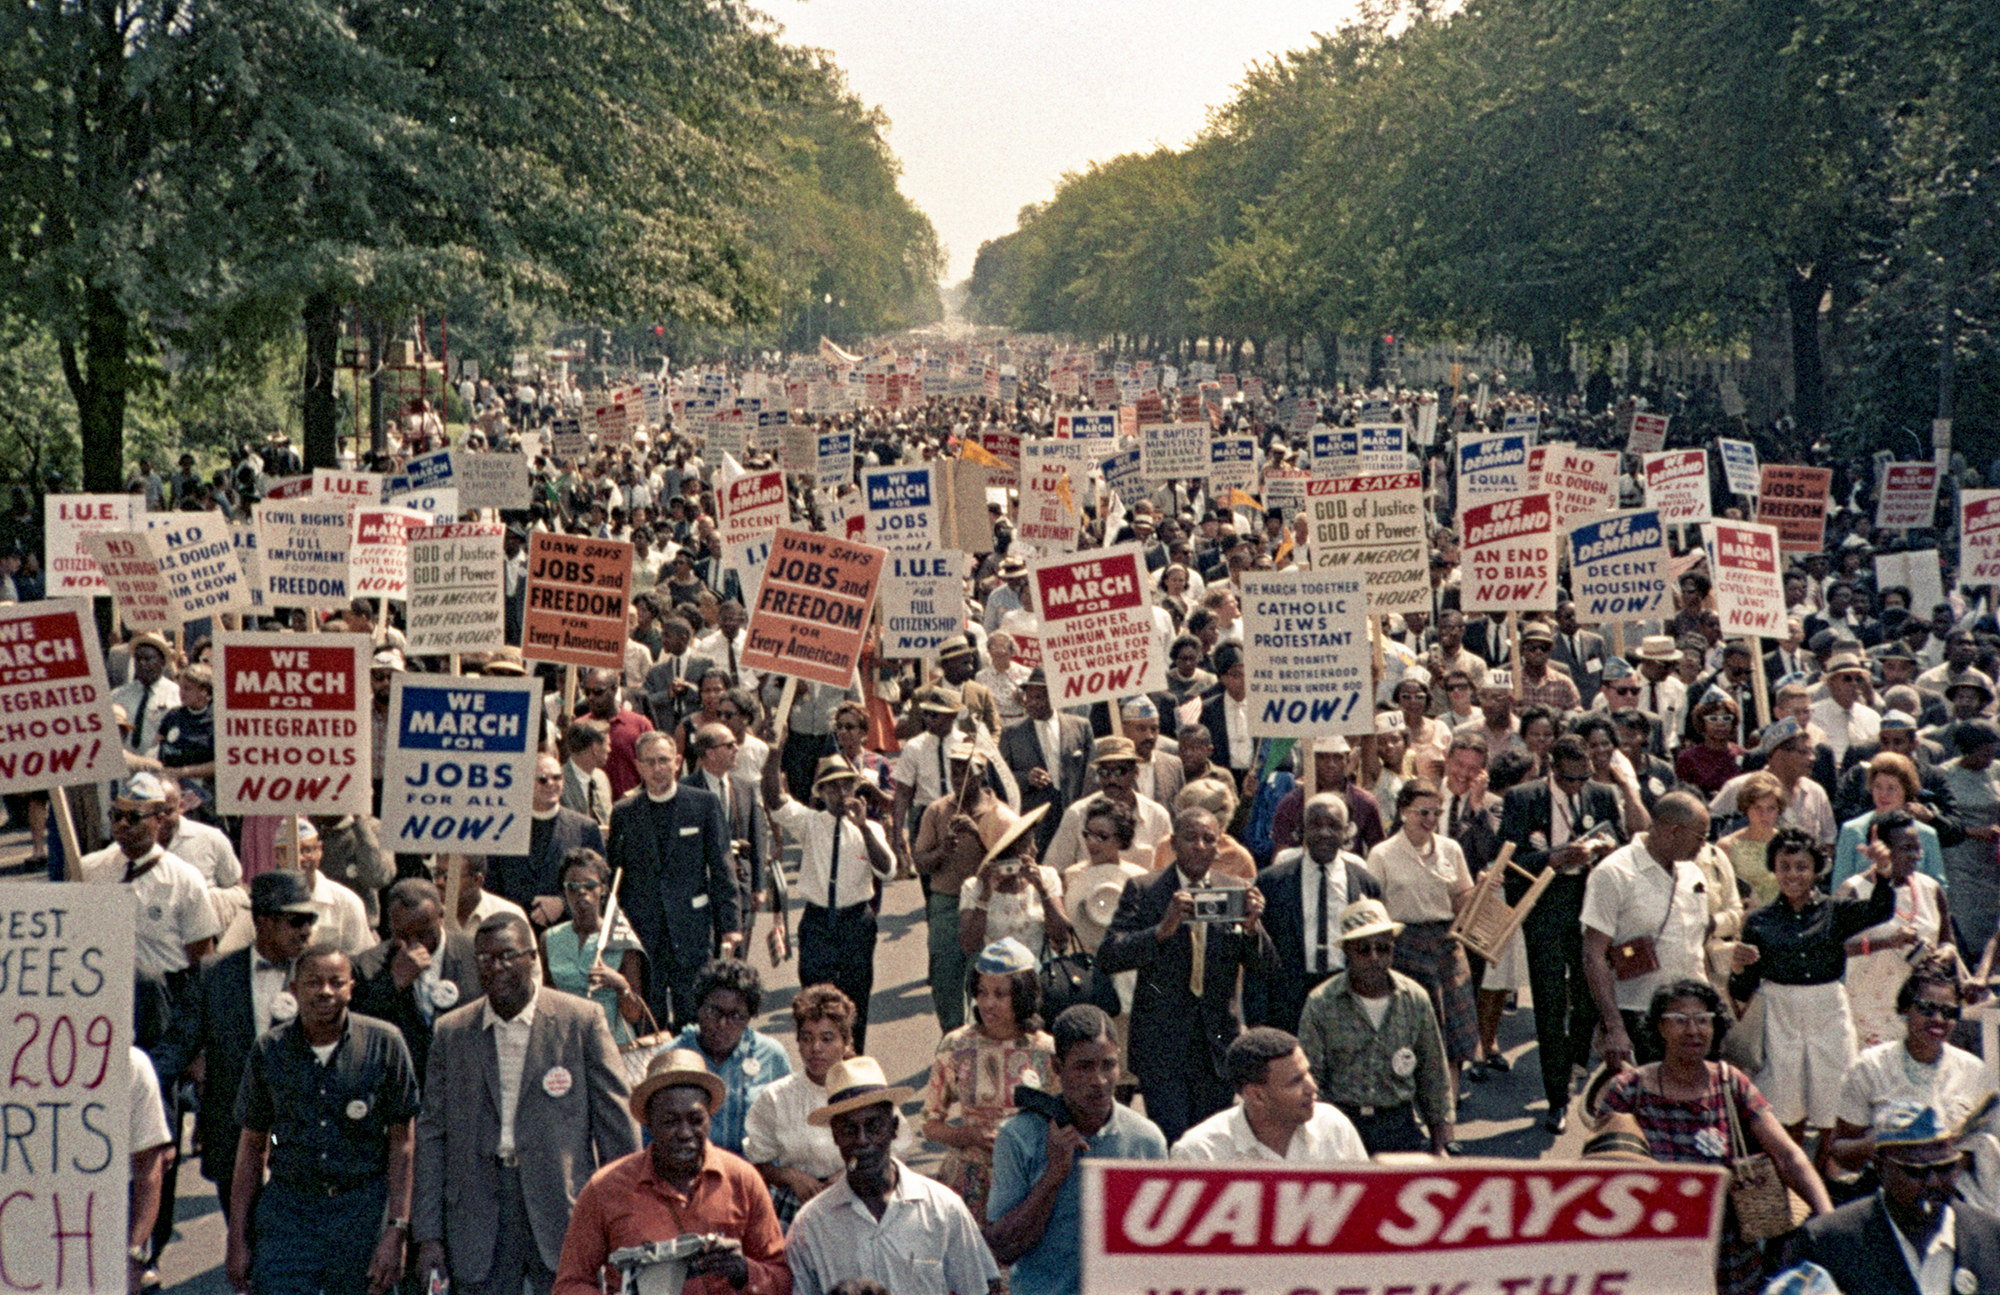 Attendees of the March on Washington walk with signs supporting equal rights.